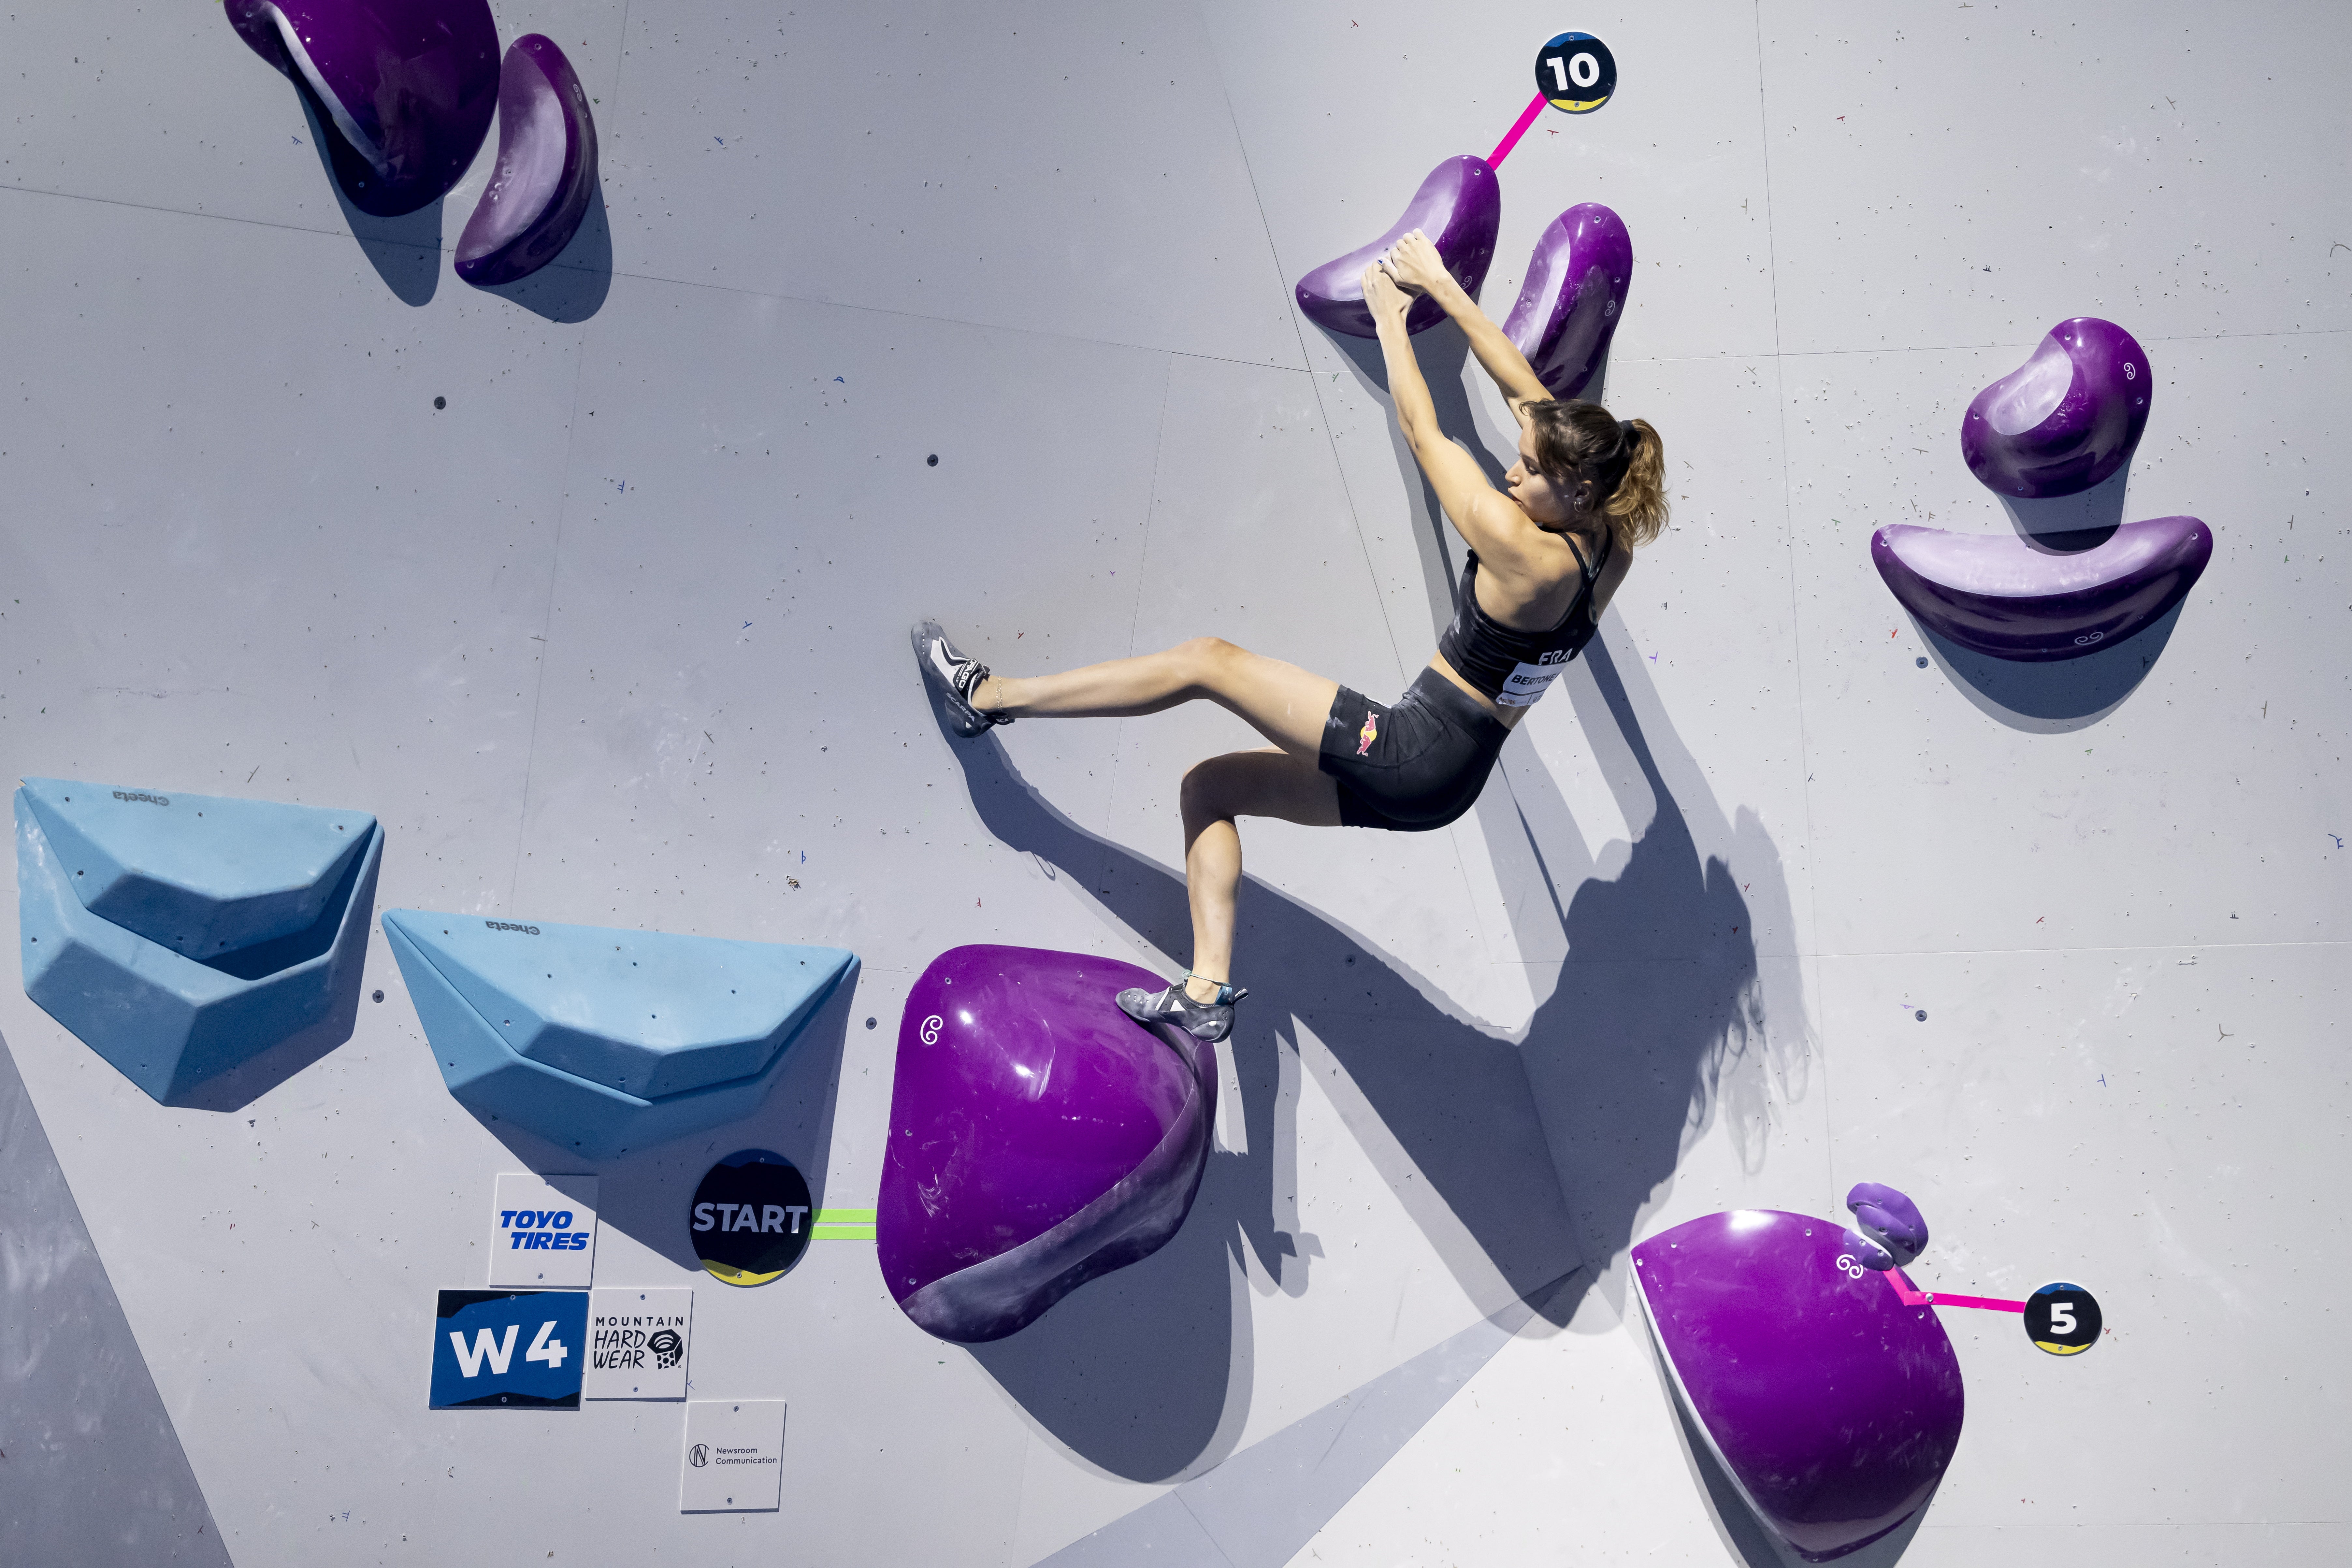 Oriane Bertone of France competes in the Women’s Boulder and Lead final at the IFSC Climbing World Championship 2023, in Bern, Switzerland